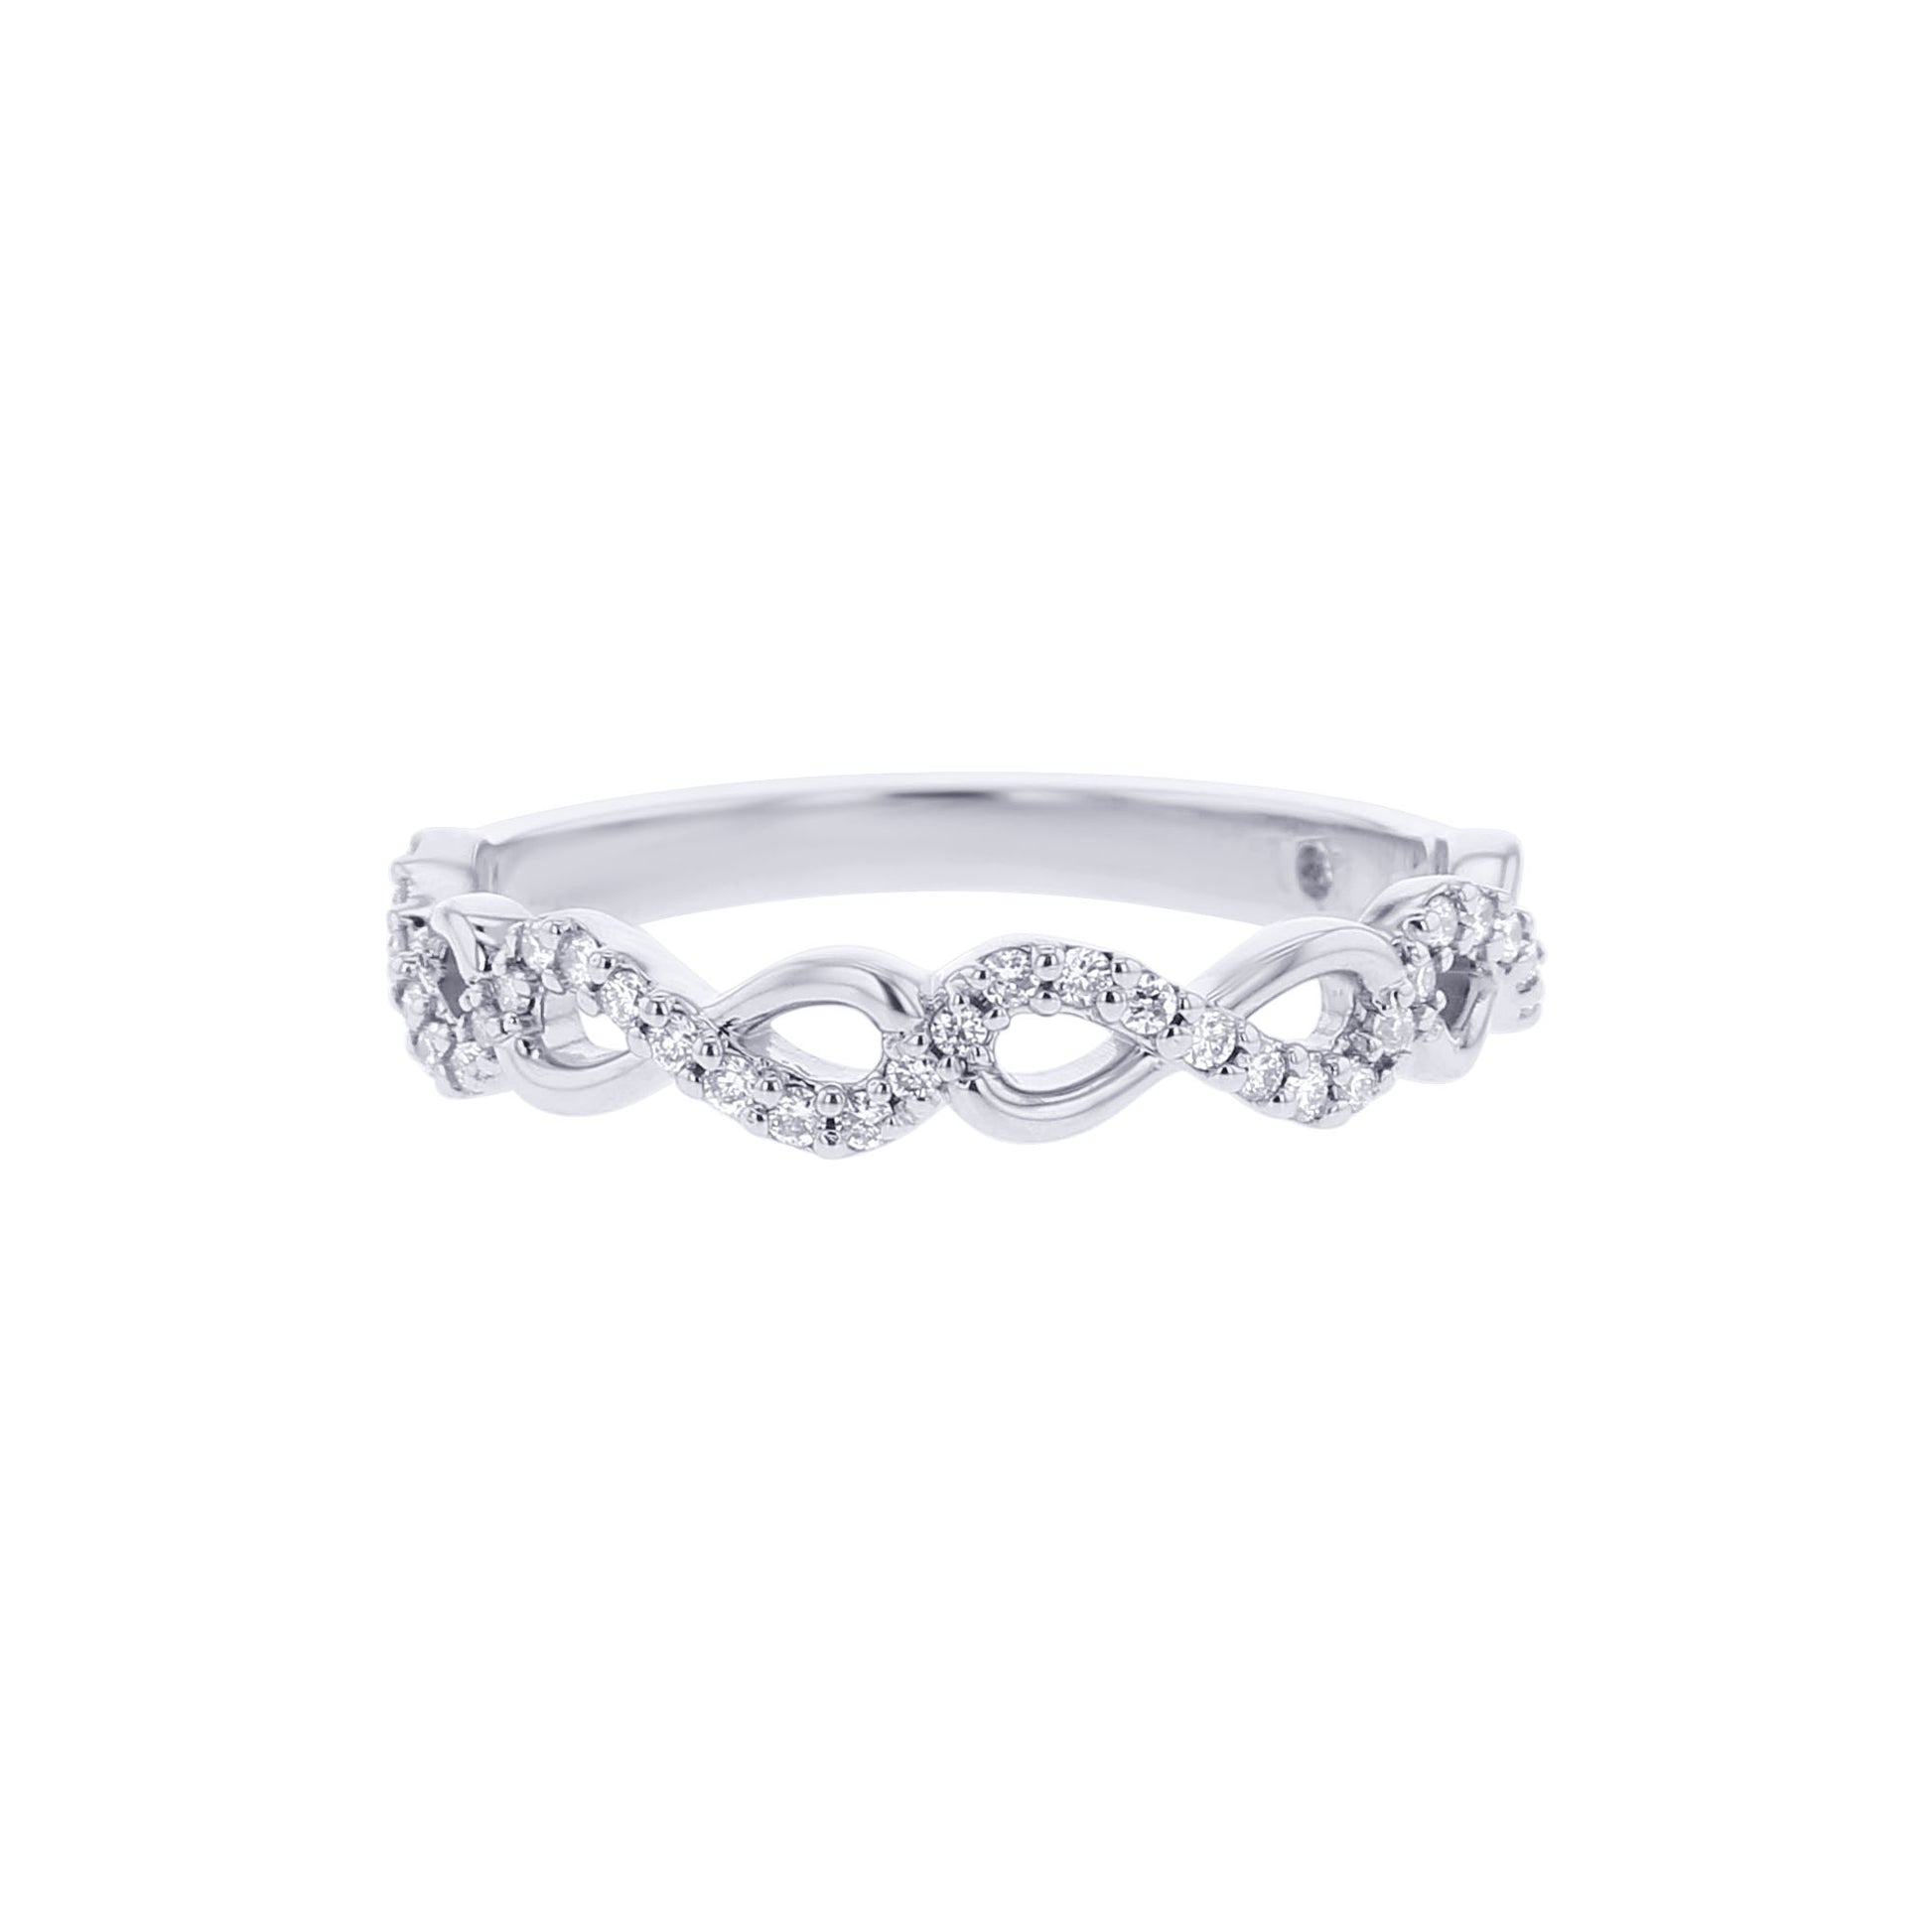 For Infinity Pave Diamond Ring